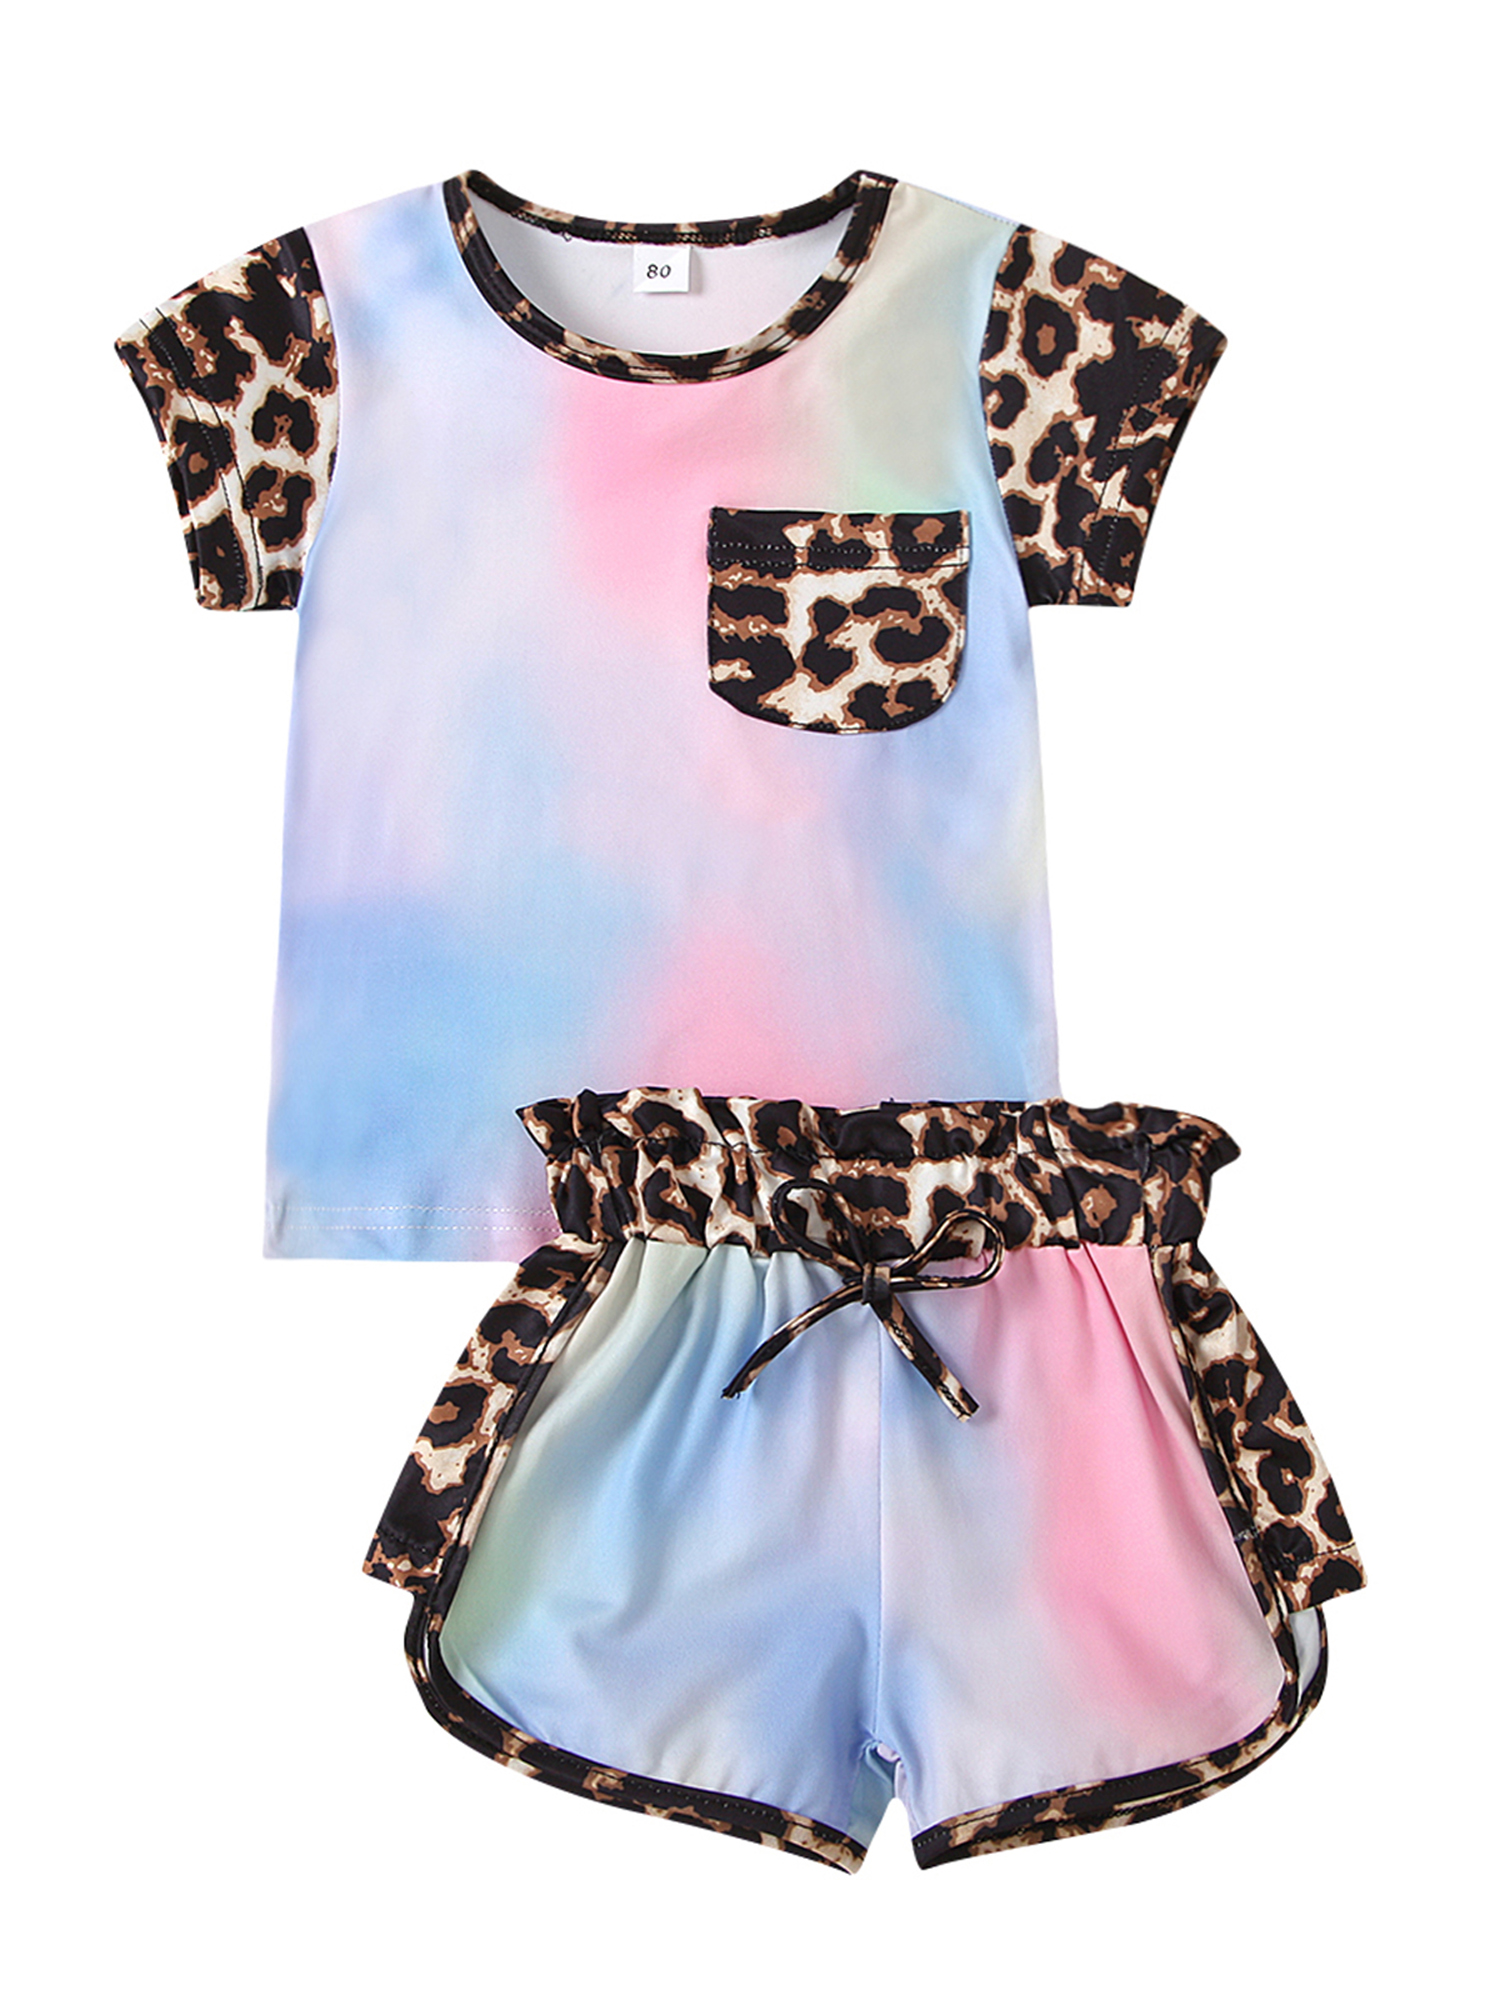 Toddler Kids Baby Girl Summer Outfits Short Sleeve T Shirt Top Leopard Shorts Pants Clothes Set